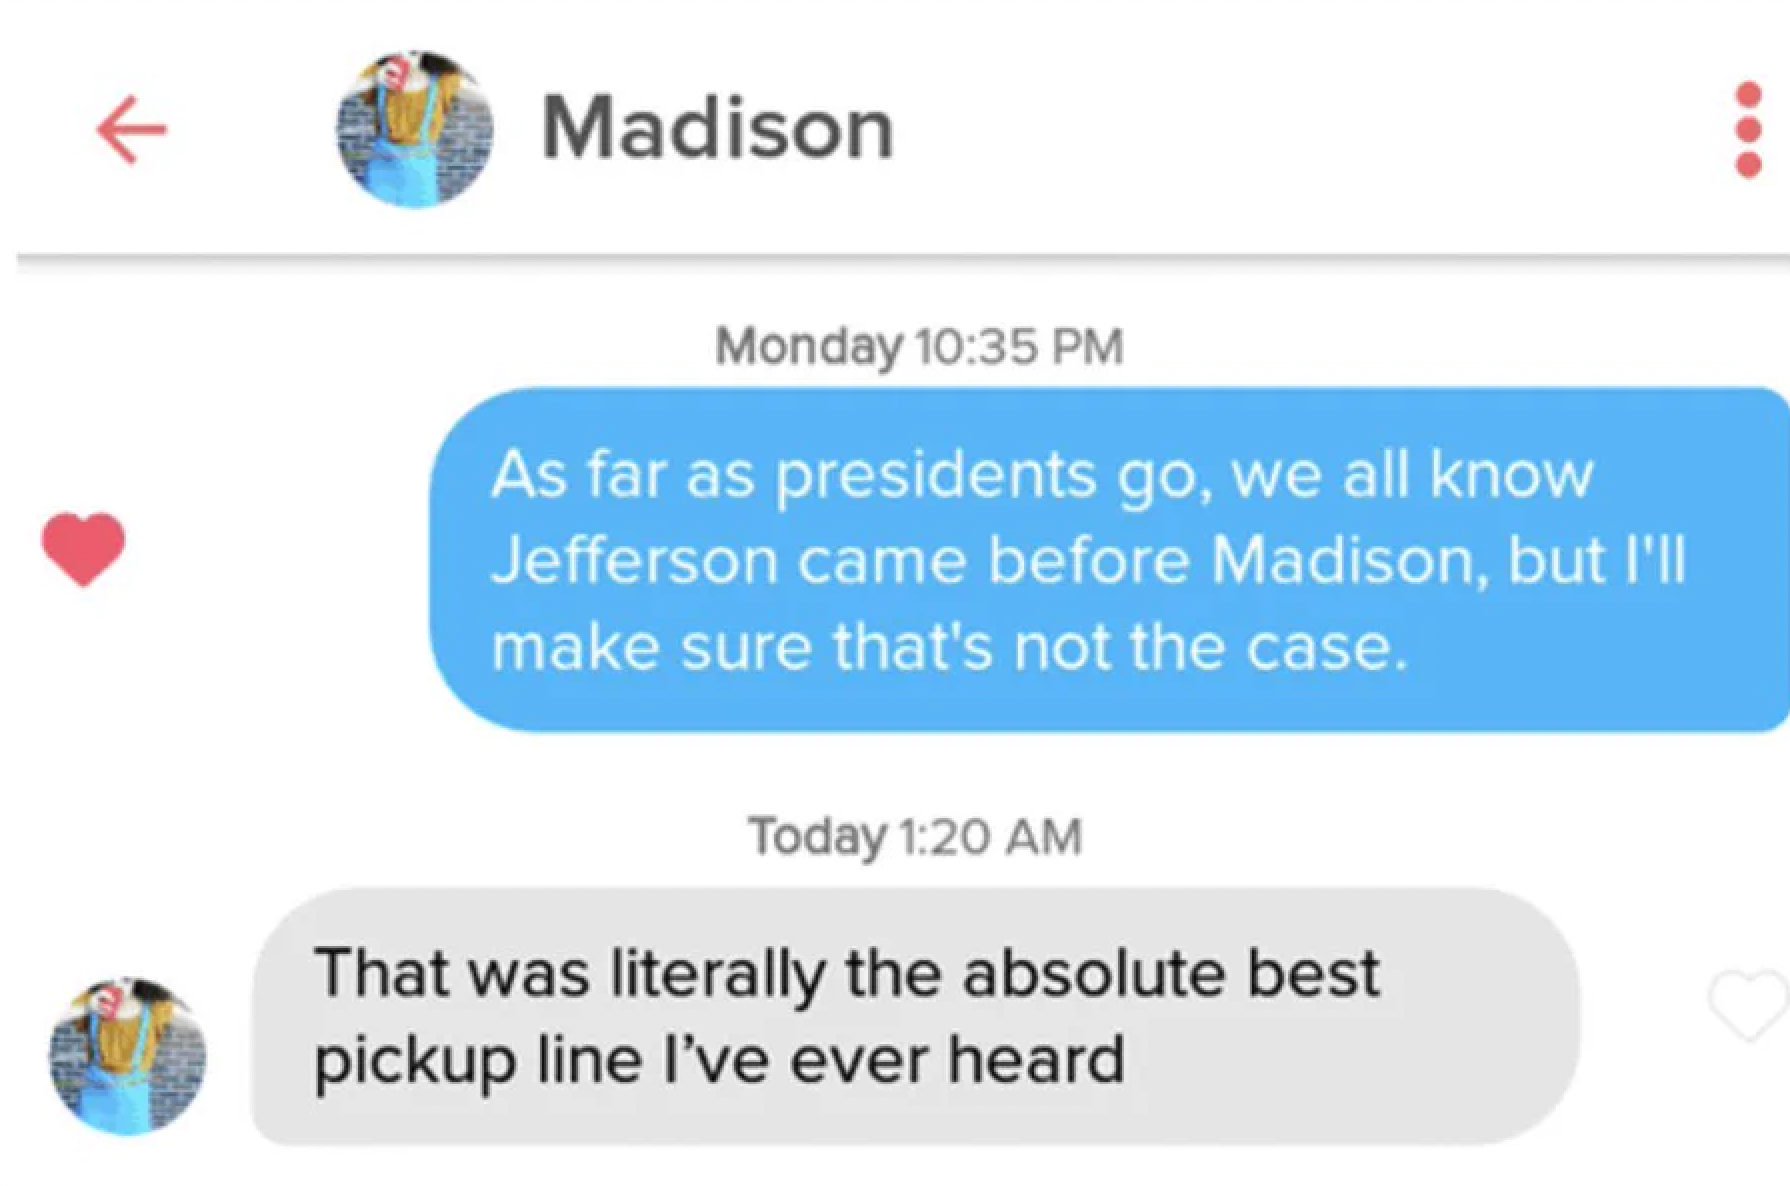 diagram - Madison Monday As far as presidents go, we all know Jefferson came before Madison, but I'll make sure that's not the case. Today That was literally the absolute best pickup line I've ever heard ...